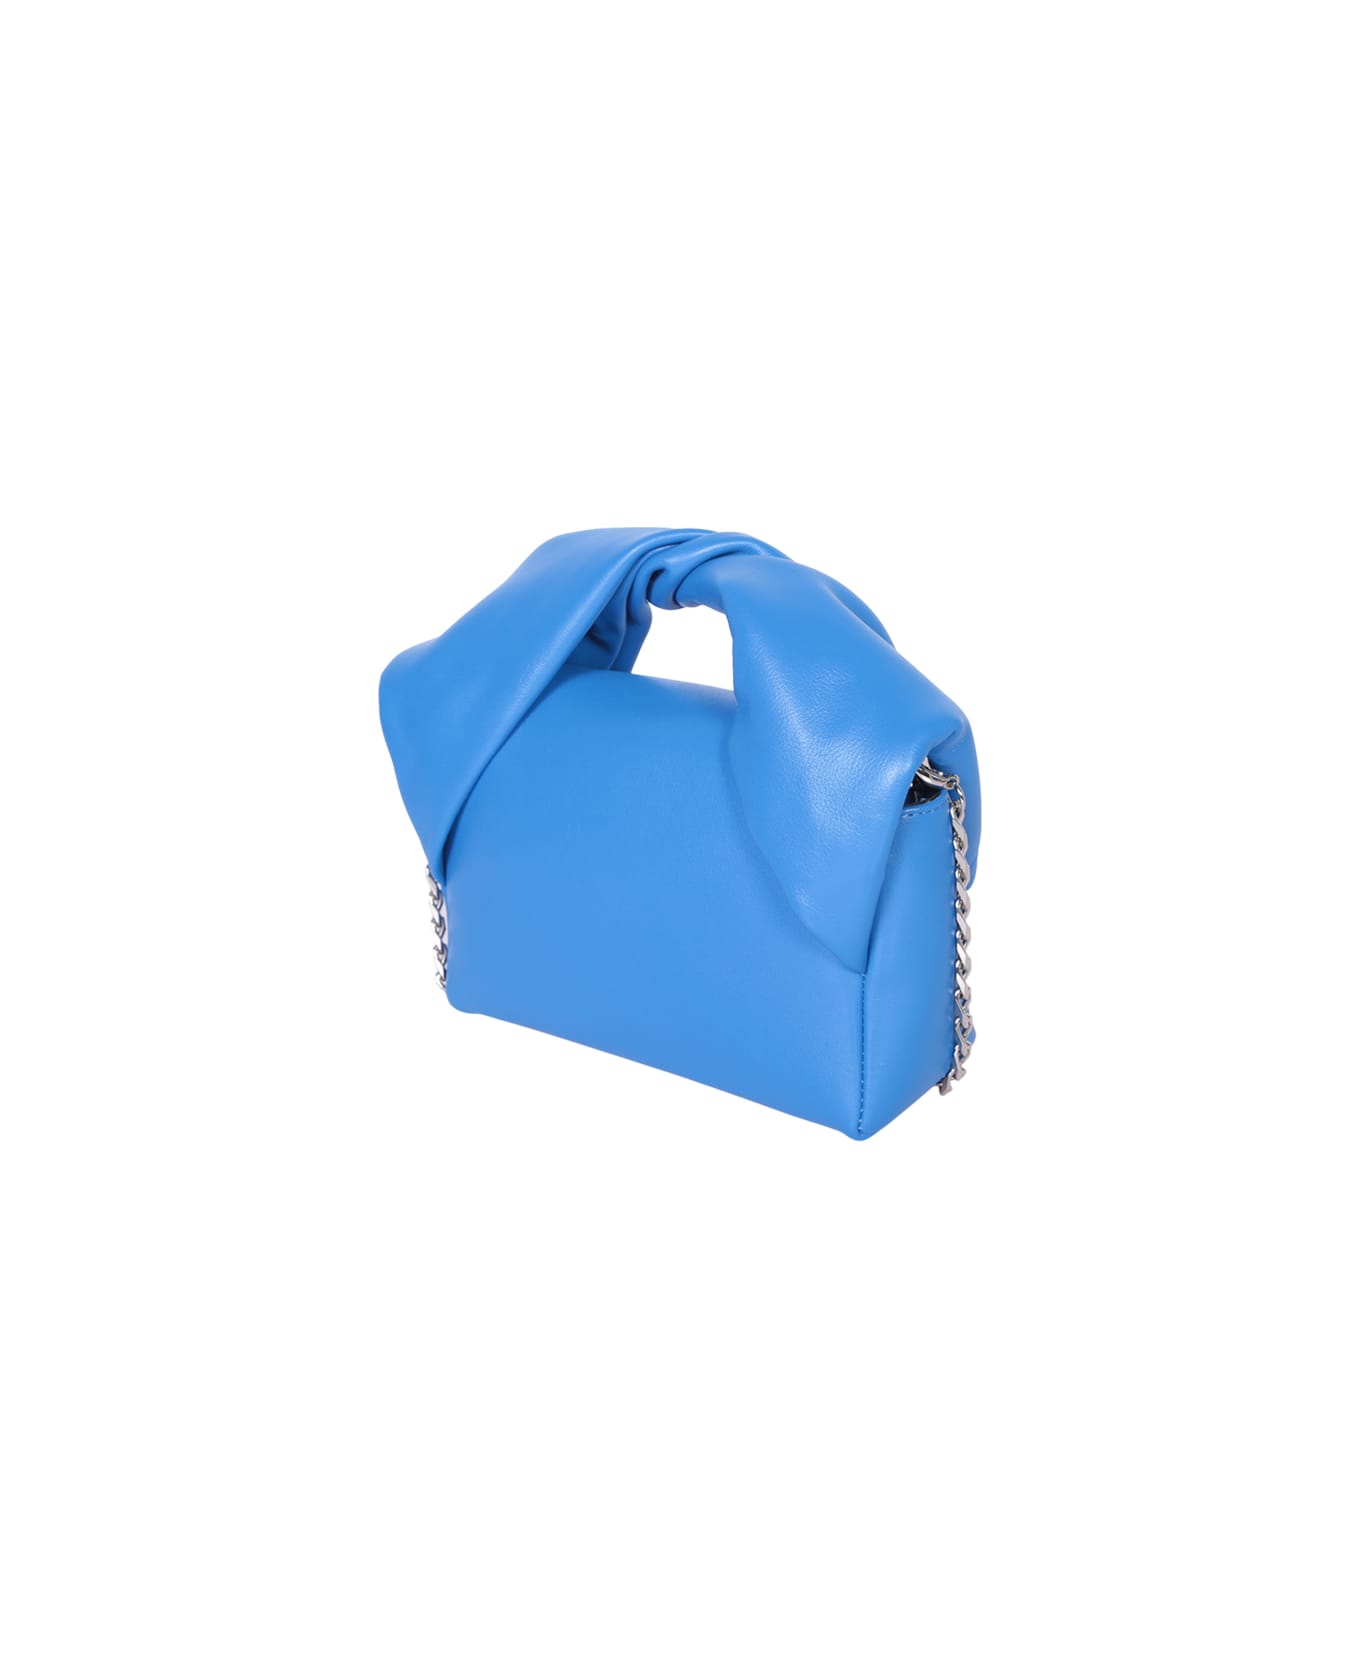 J.W. Anderson Blue Leather Bag - Blue トートバッグ